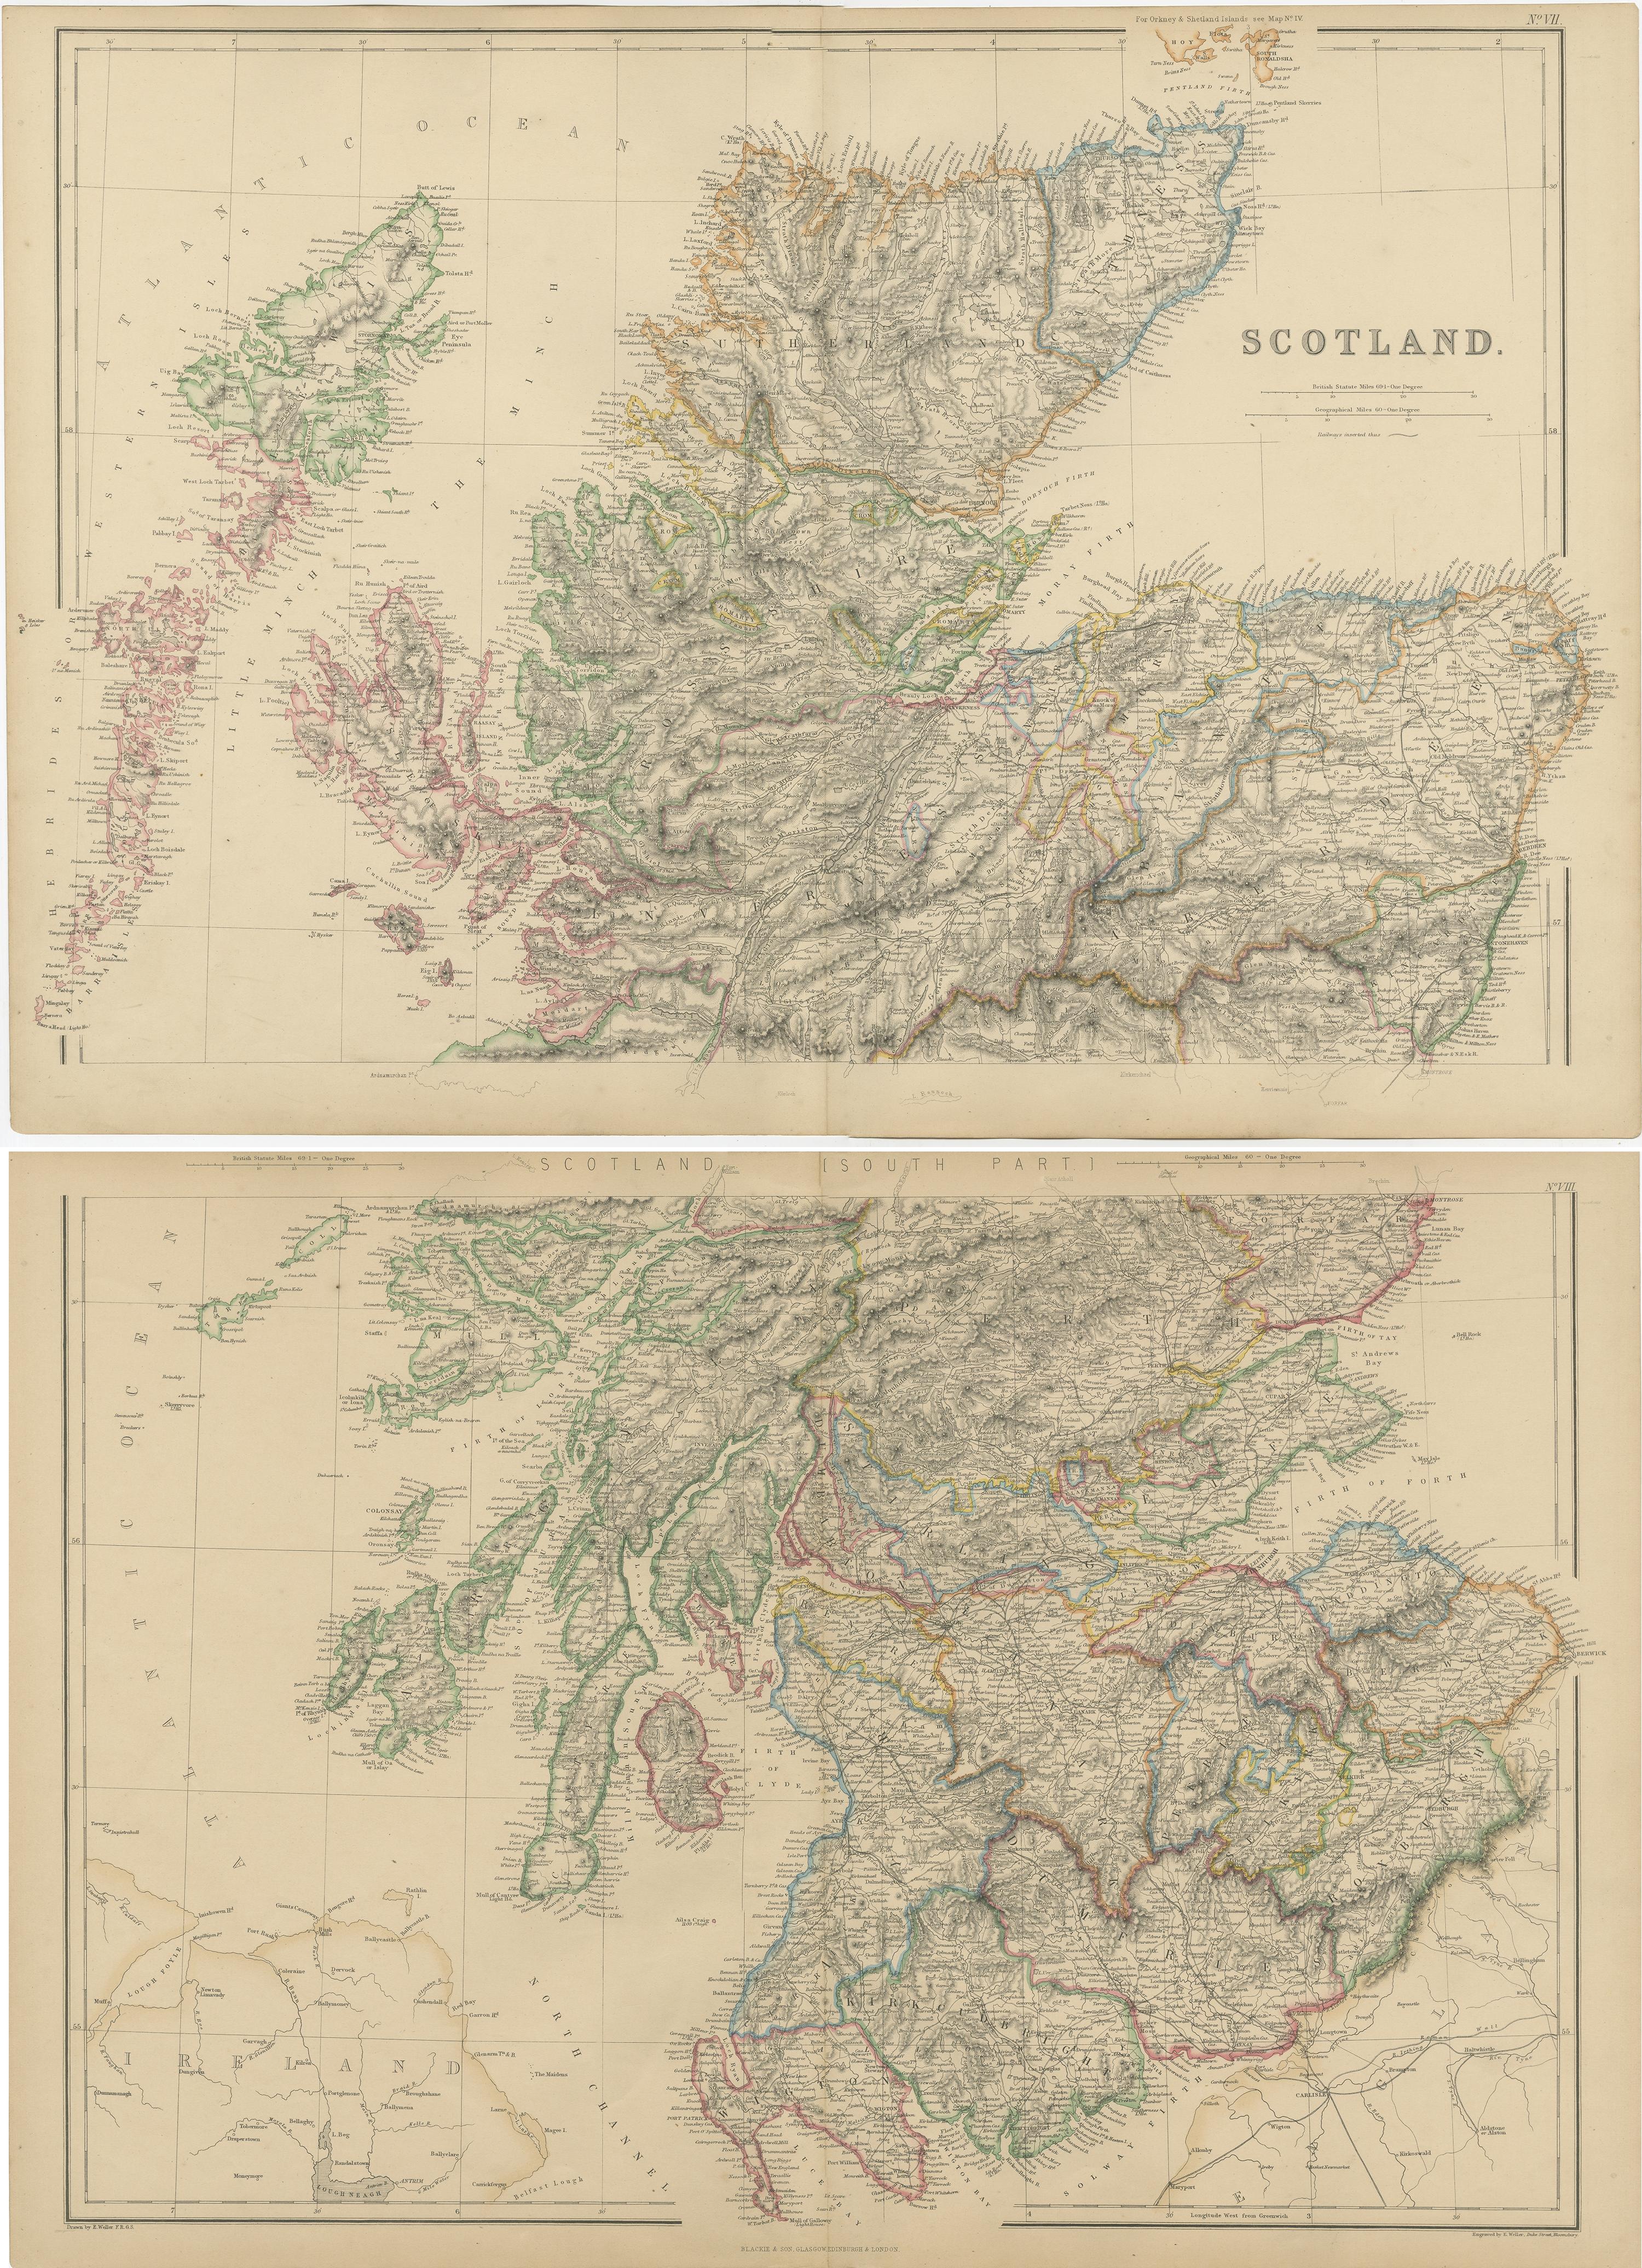 Paper Set of 2 Antique Maps of Scotland by W. G. Blackie, 1859 For Sale